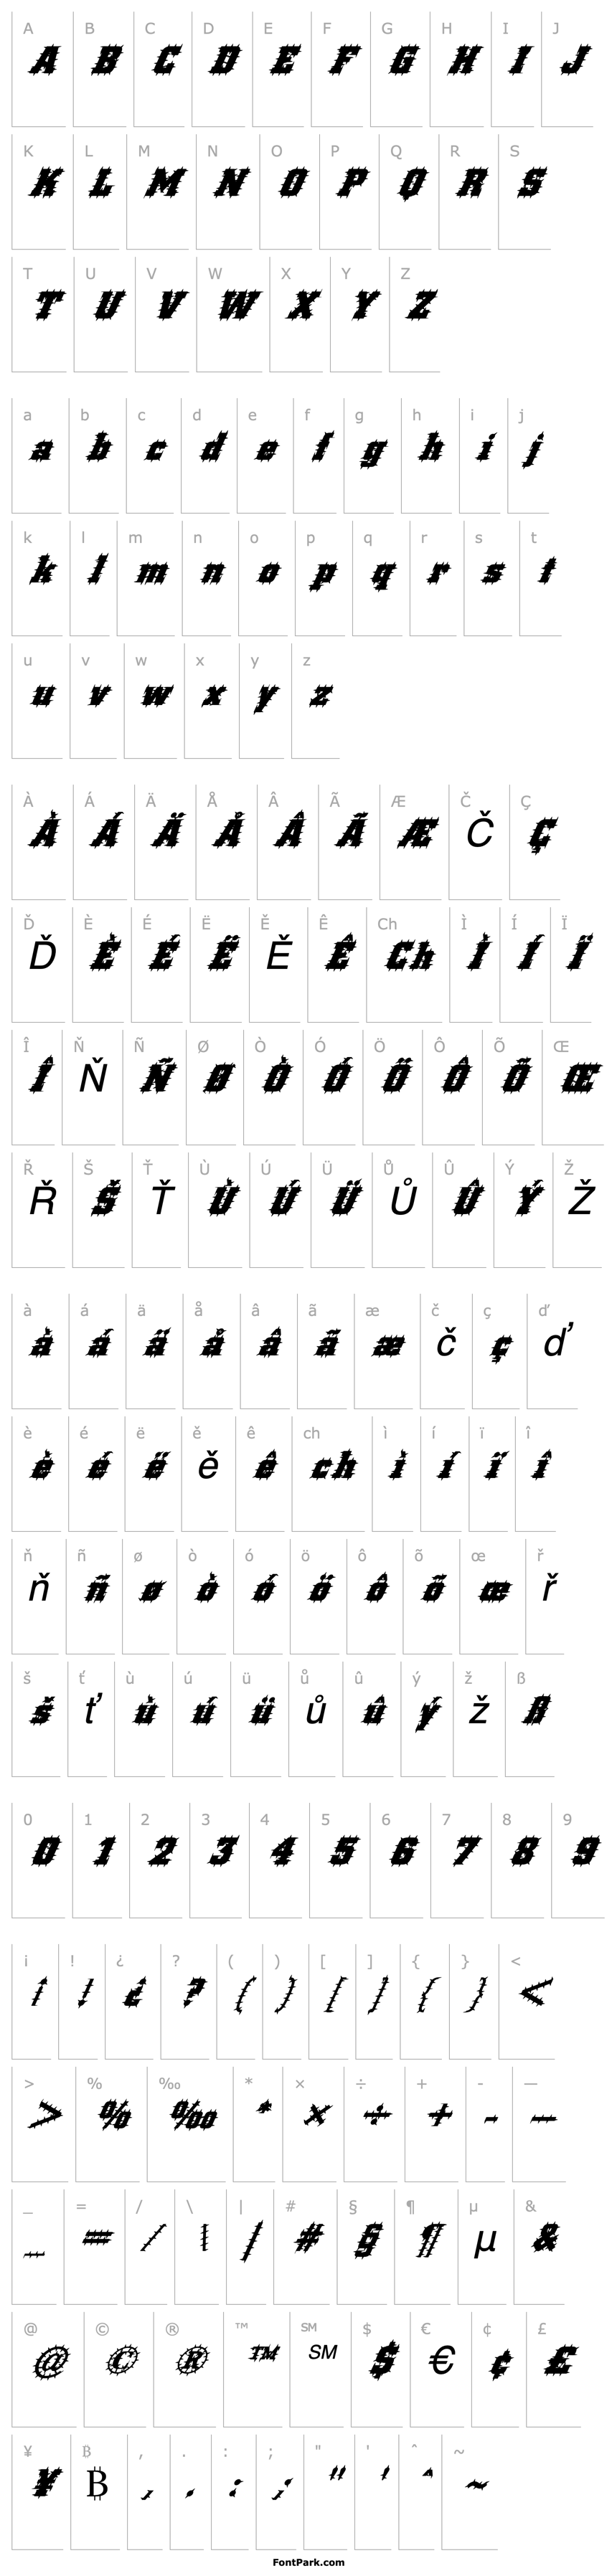 Overview FZ BASIC 53 SPIKED ITALIC